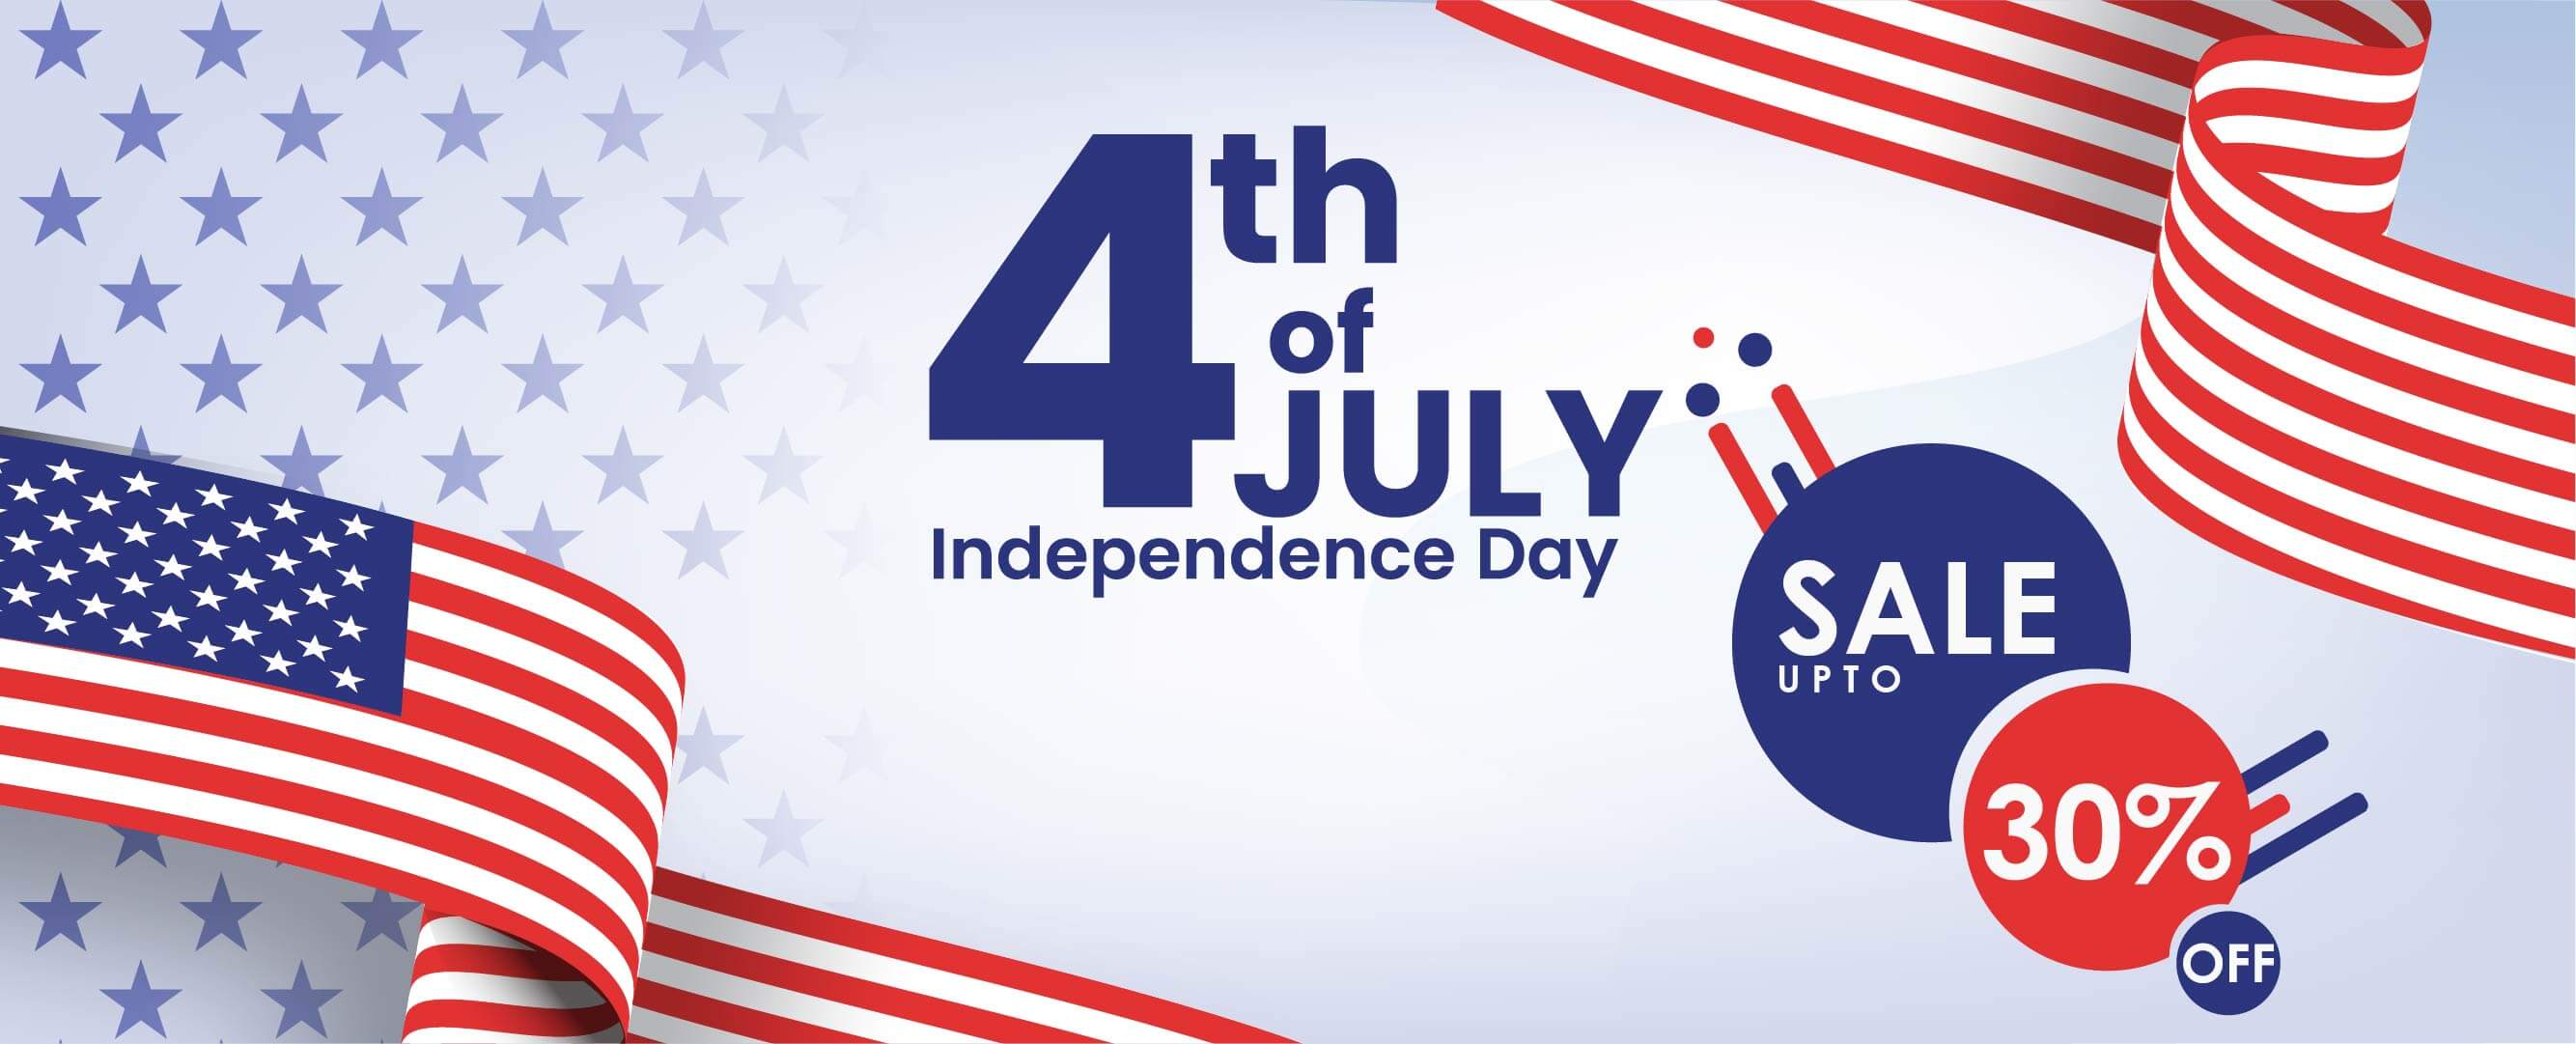 Happy Independence Day Sale Up To 30 Percent Off